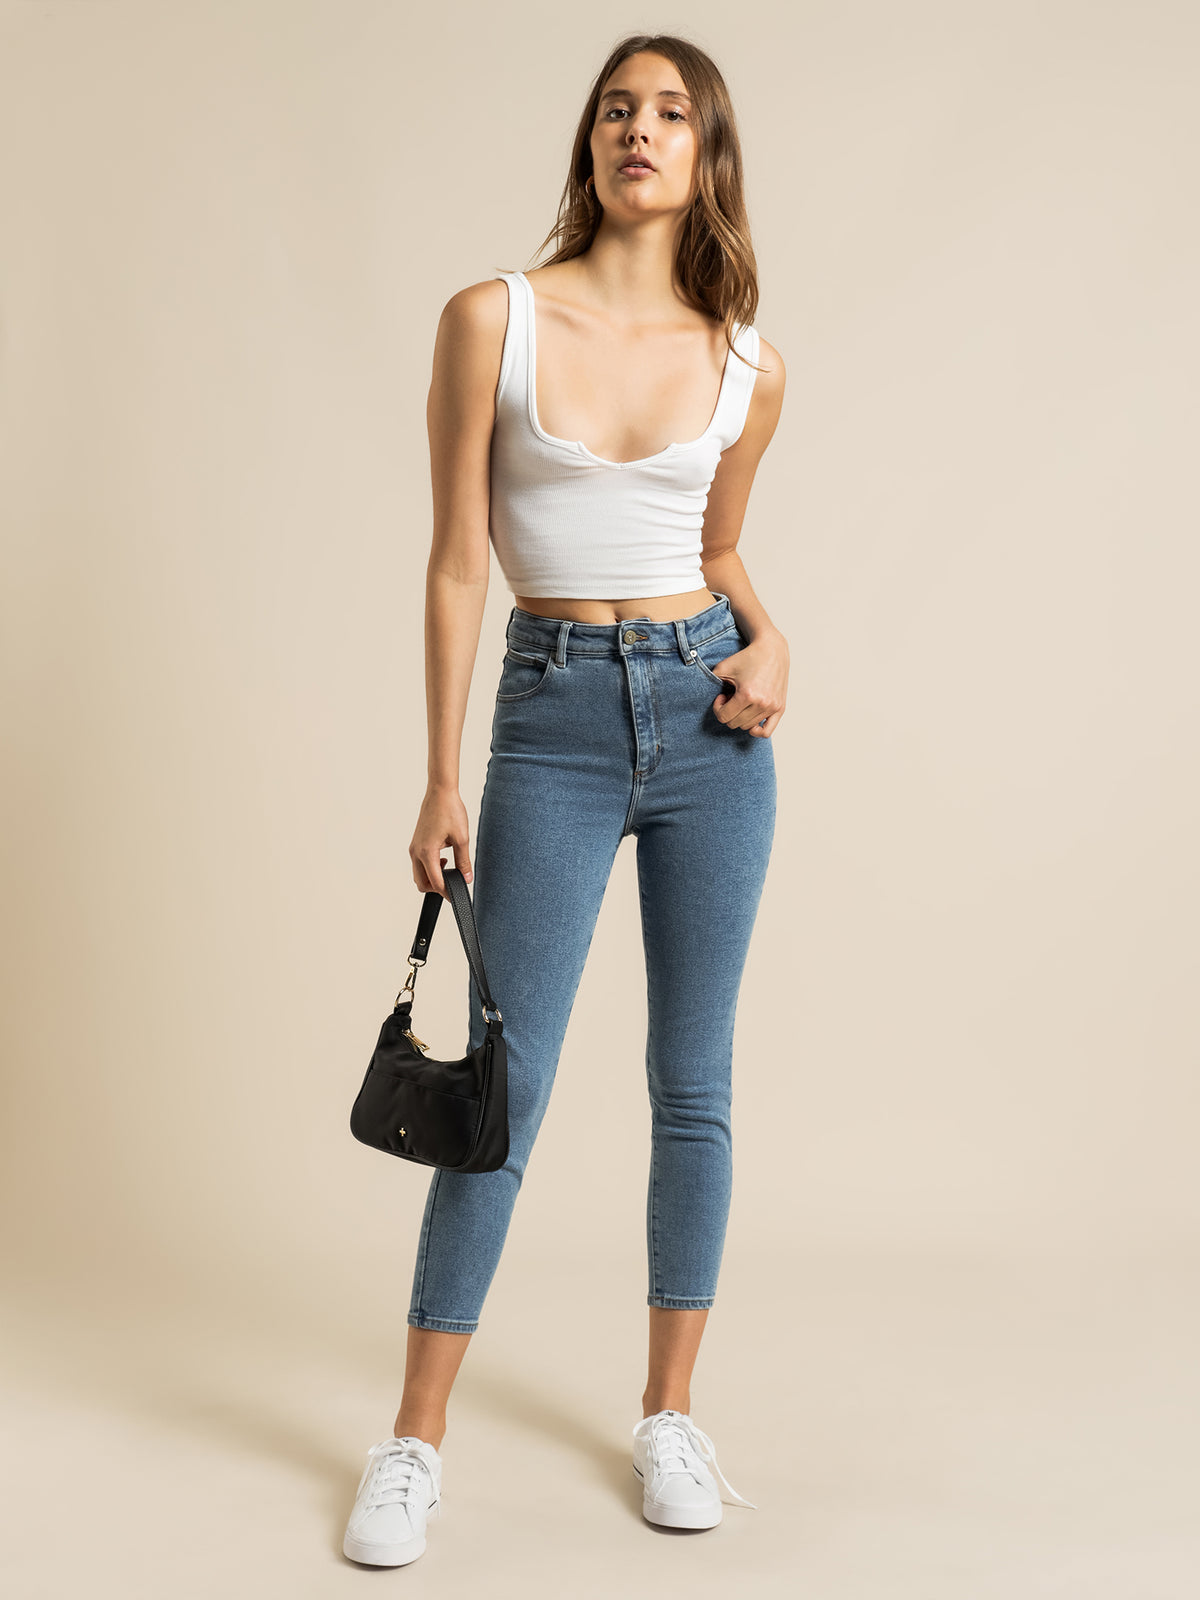 A High Skinny Ankle Basher Petite Jeans in LA Blues